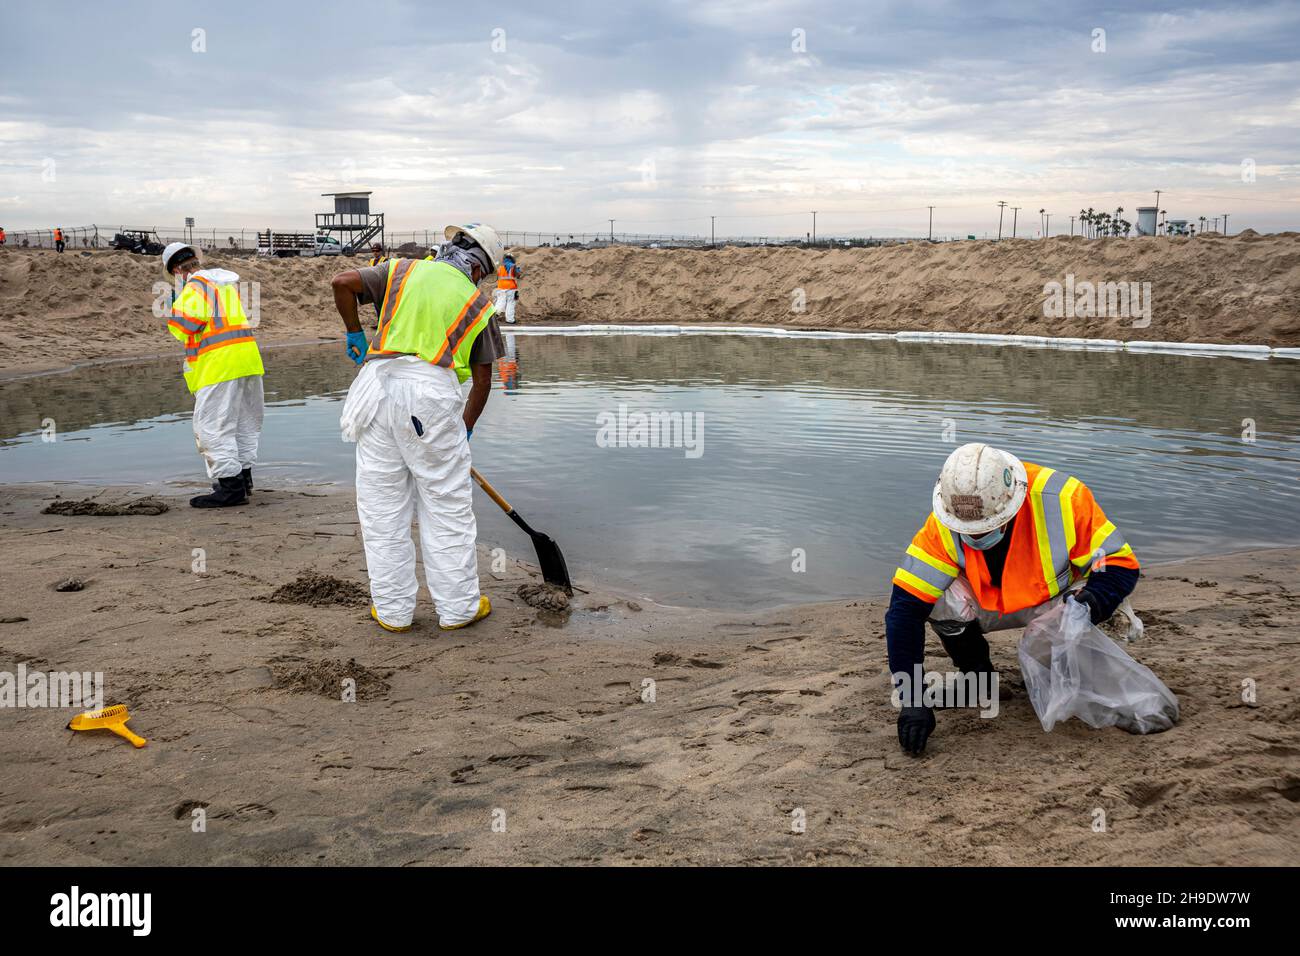 A cleanup crew cleans up oil and tar blobs, and shores up a berm that was built to prevent oil from spreading into the Santa Ana River which normally Stock Photo